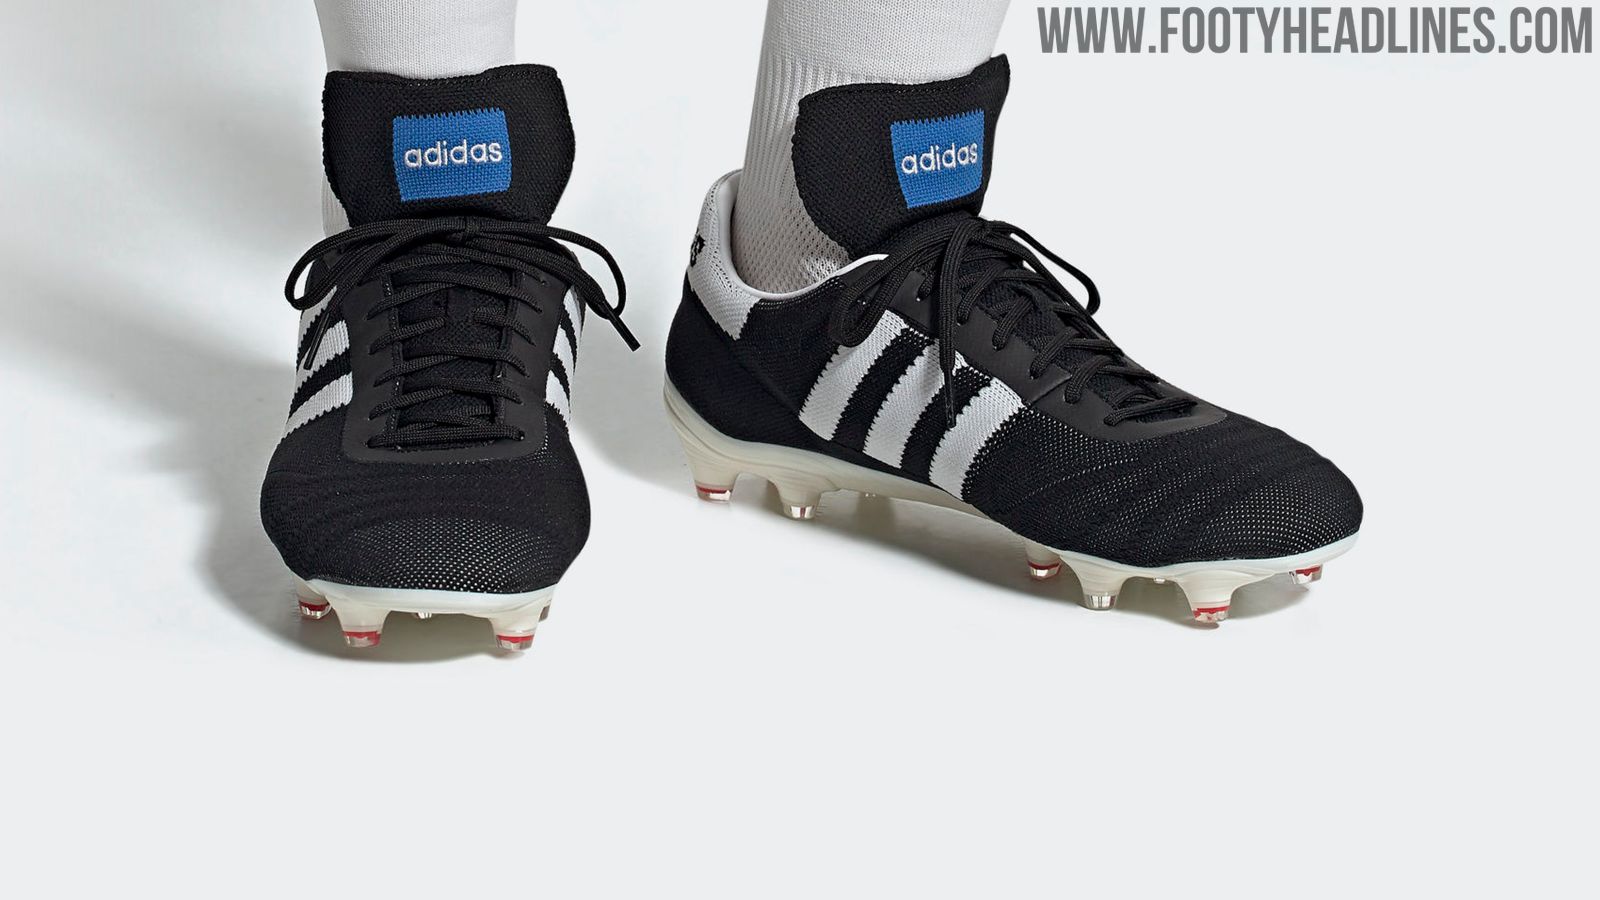 Limited-Edition Copa 70 Primeknit Boots Revealed - Dybala Will Wear Them - Footy Headlines